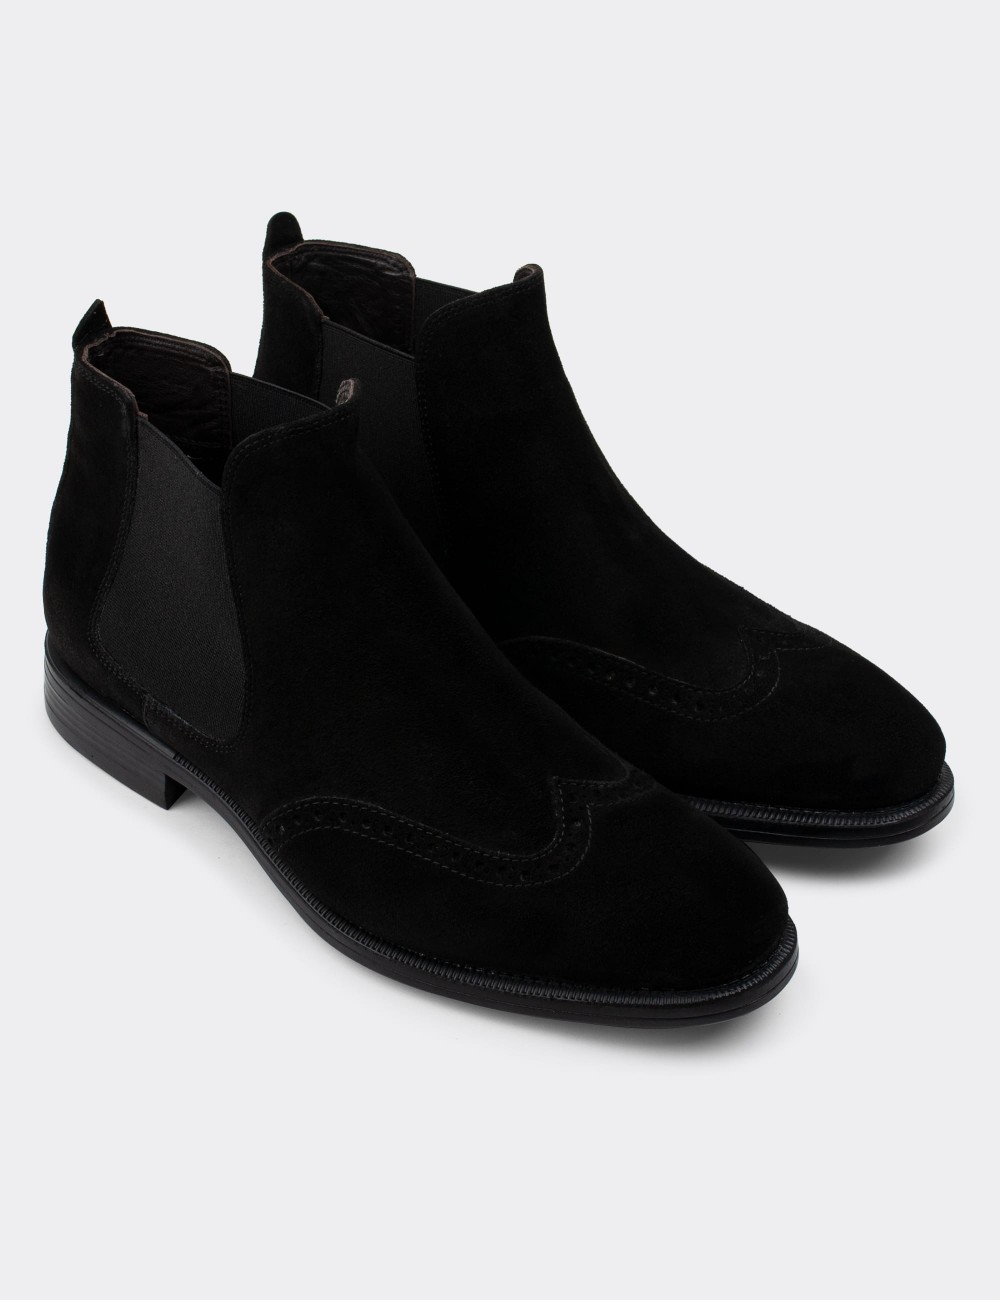 Black Suede Leather Chelsea Boots - 01622MSYHC12